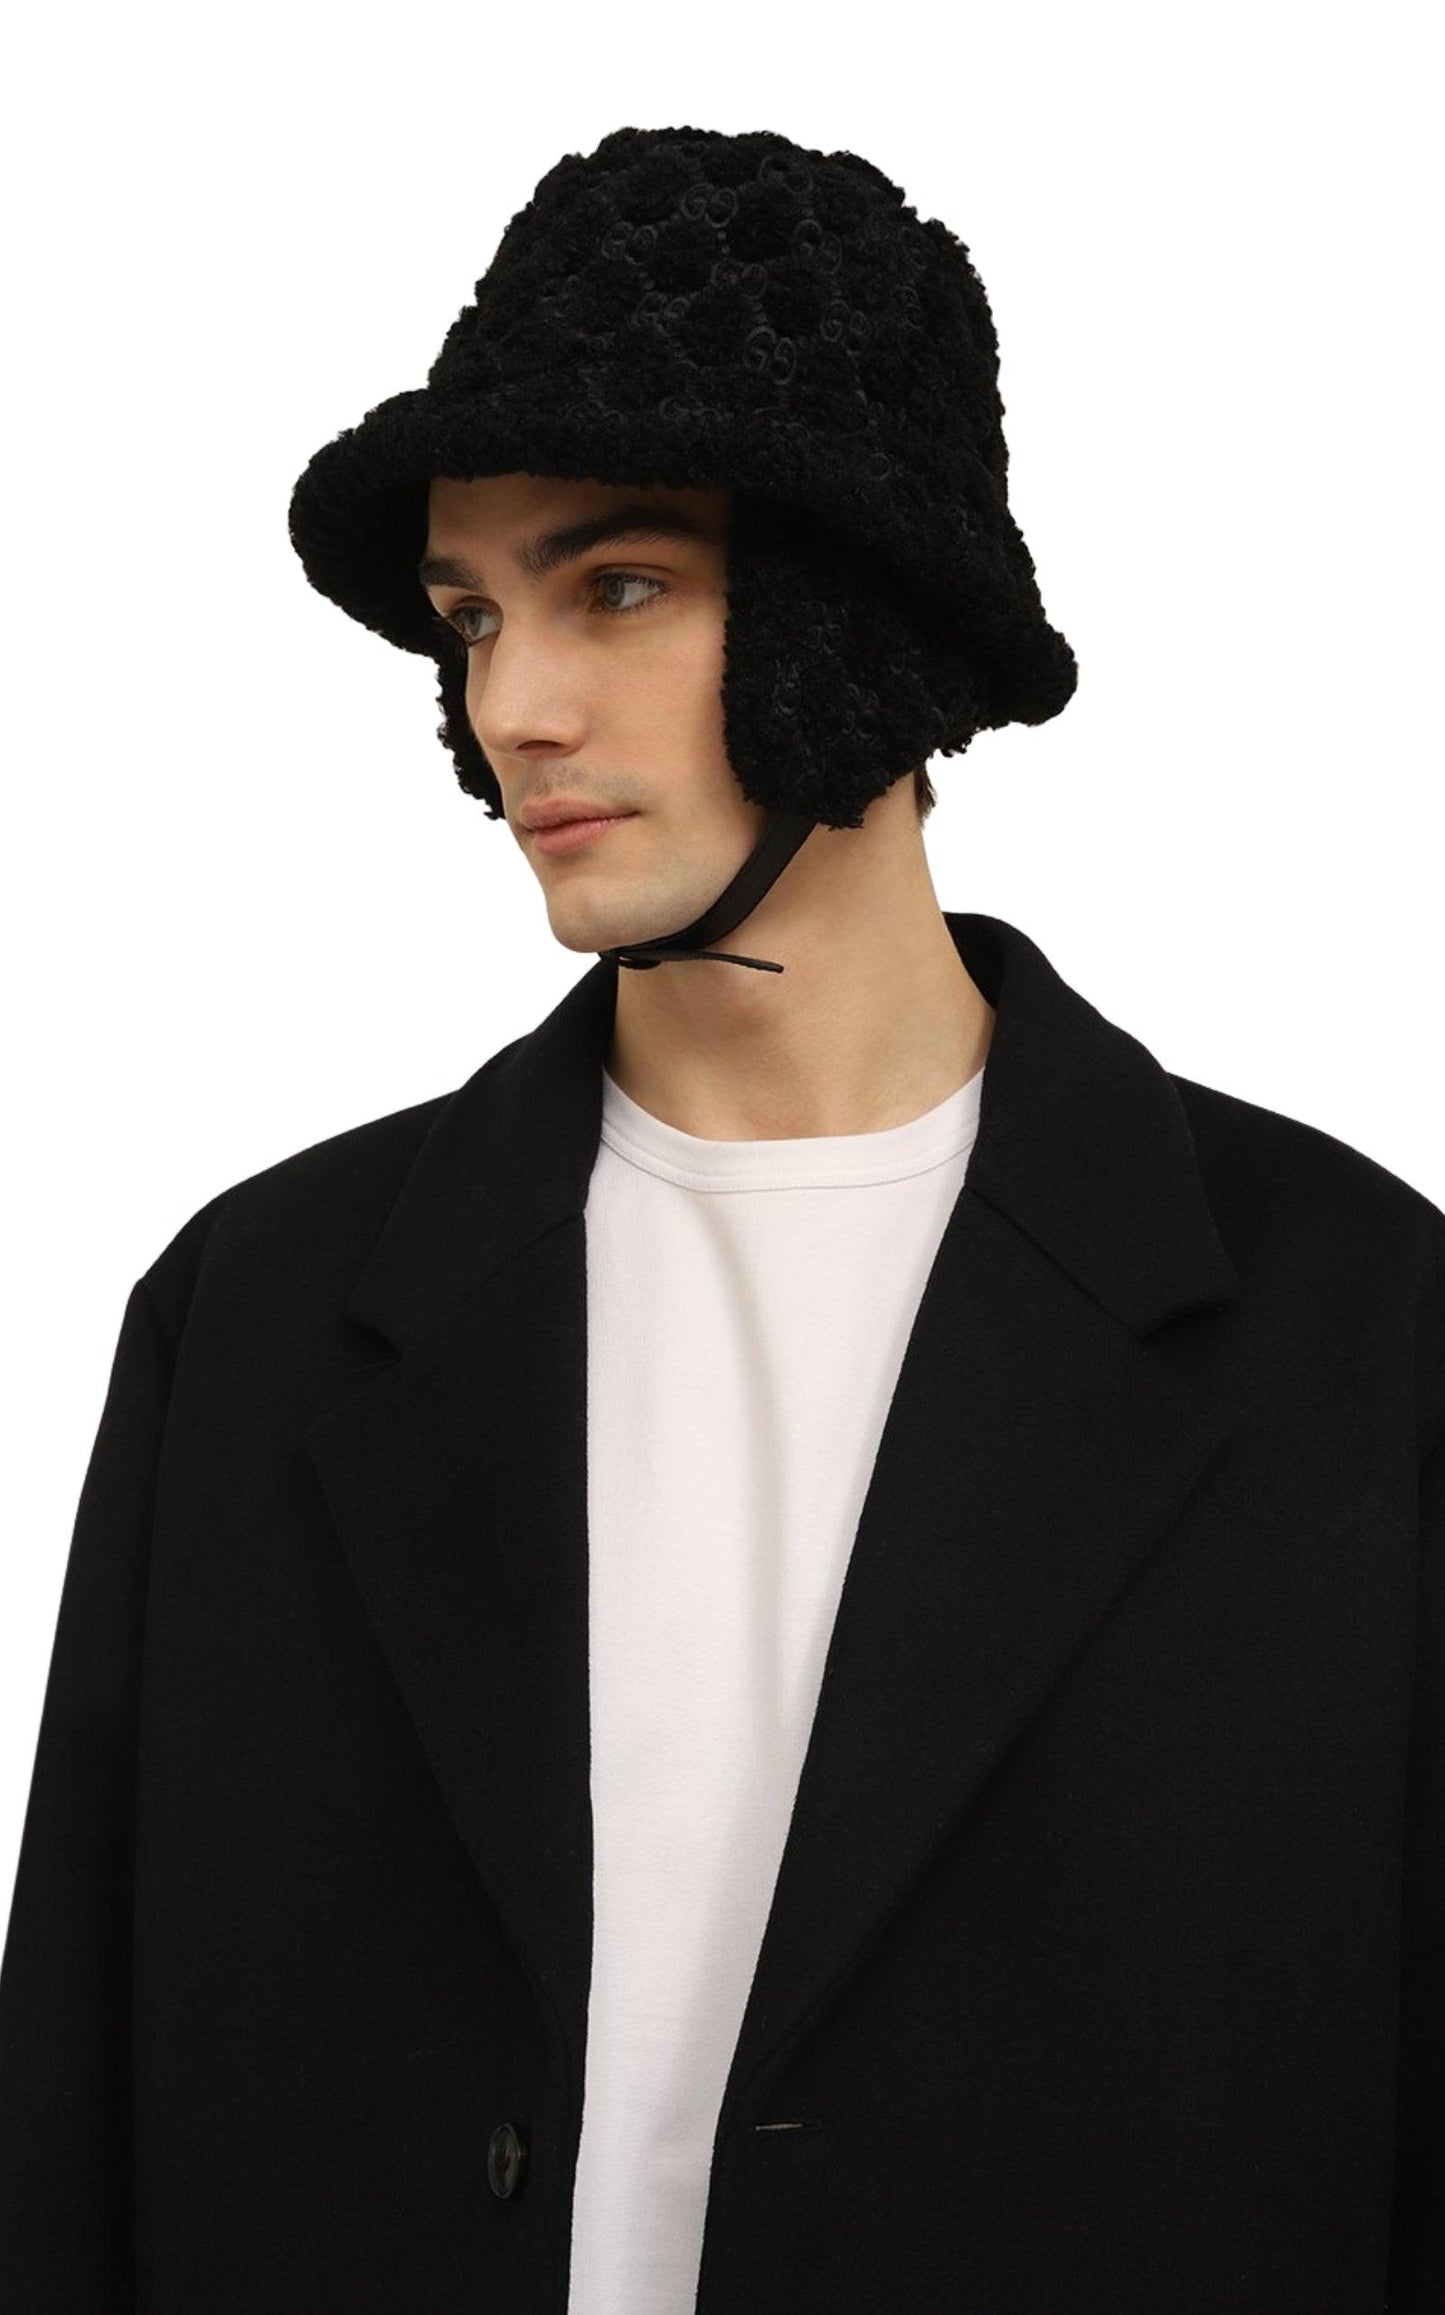  GucciBlack Curly Gg Eco Fur Hat With Ear Flaps - Runway Catalog